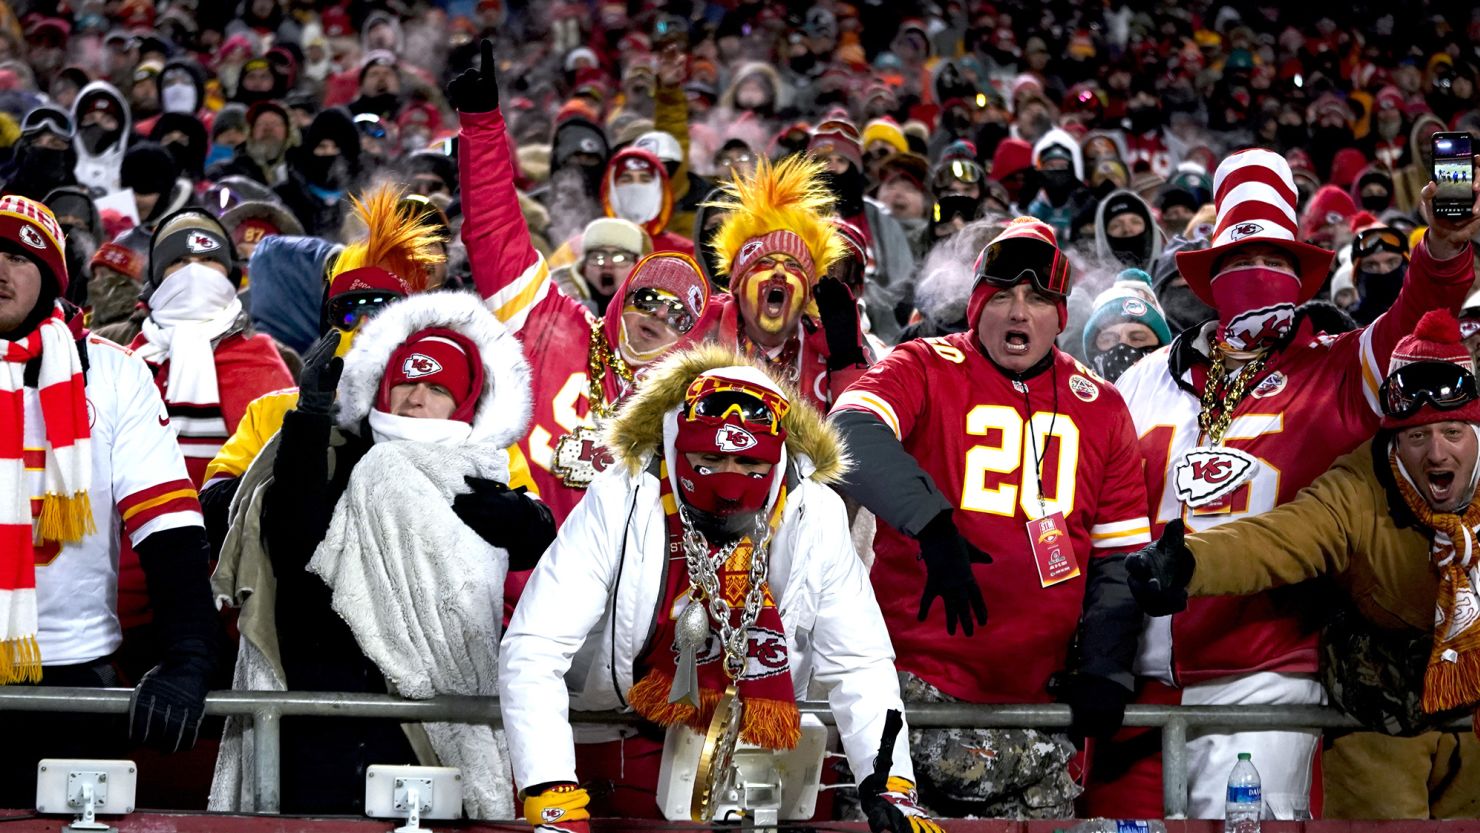 NFL's policy over cold-weather games questioned after fans treated for hypothermia and frostbite at Chiefs-Dolphins game | CNN